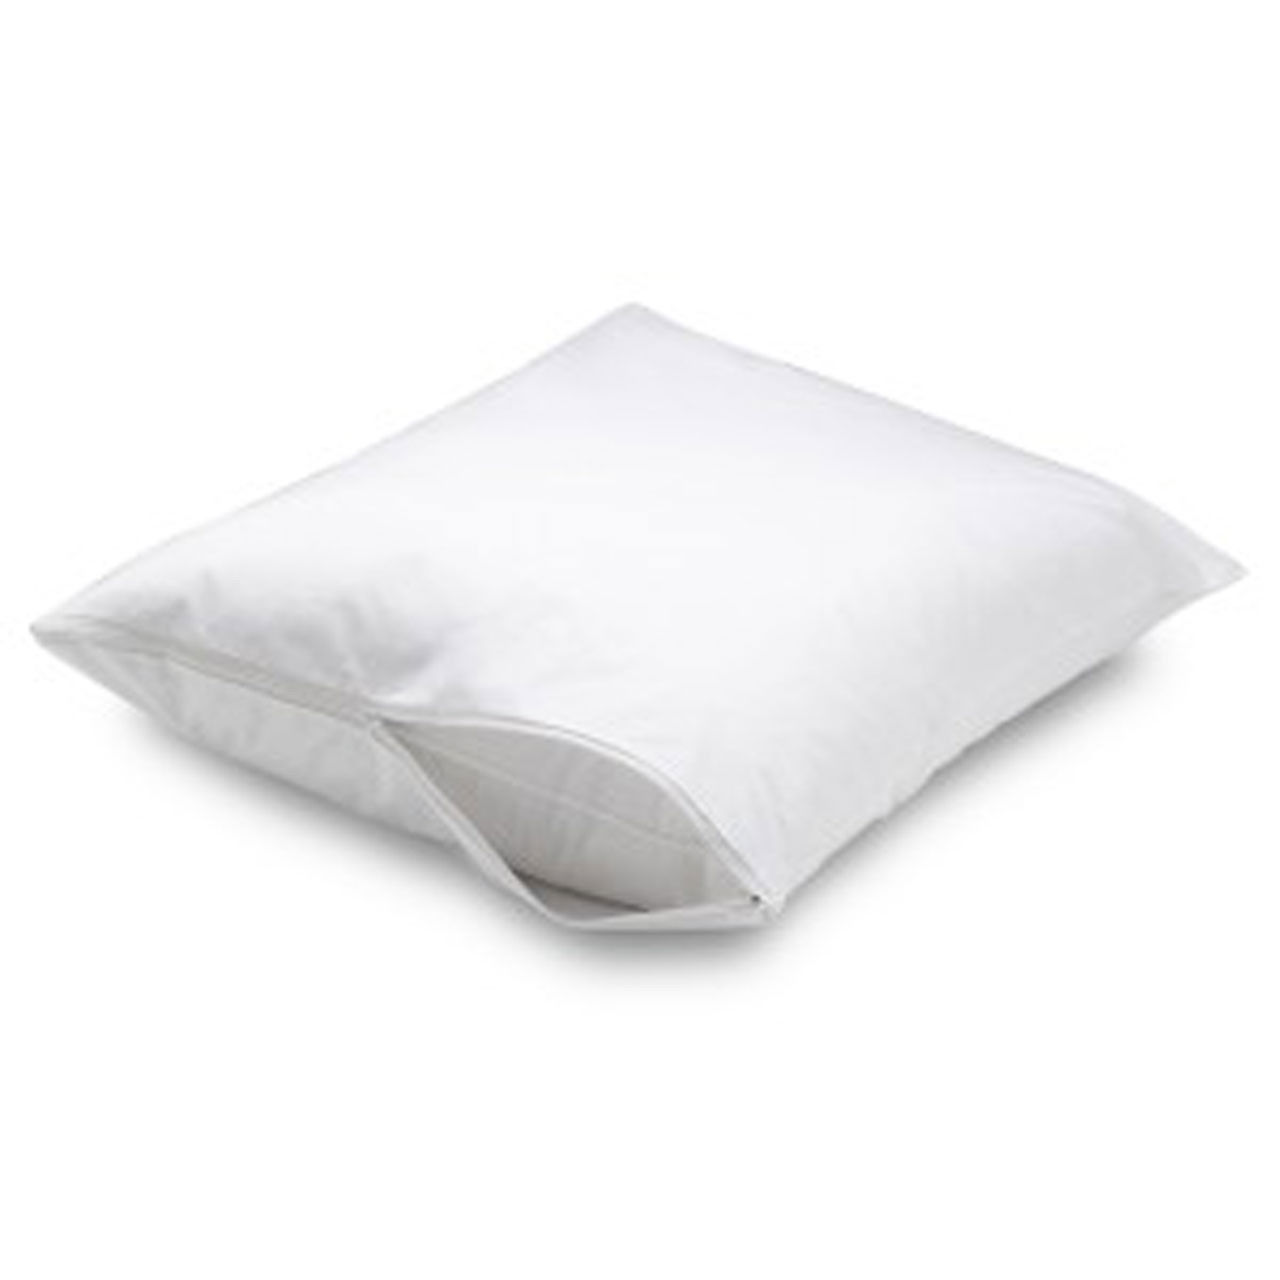 Will my pillows last longer with bulk pillow protectors like the Woven Zippered ones?